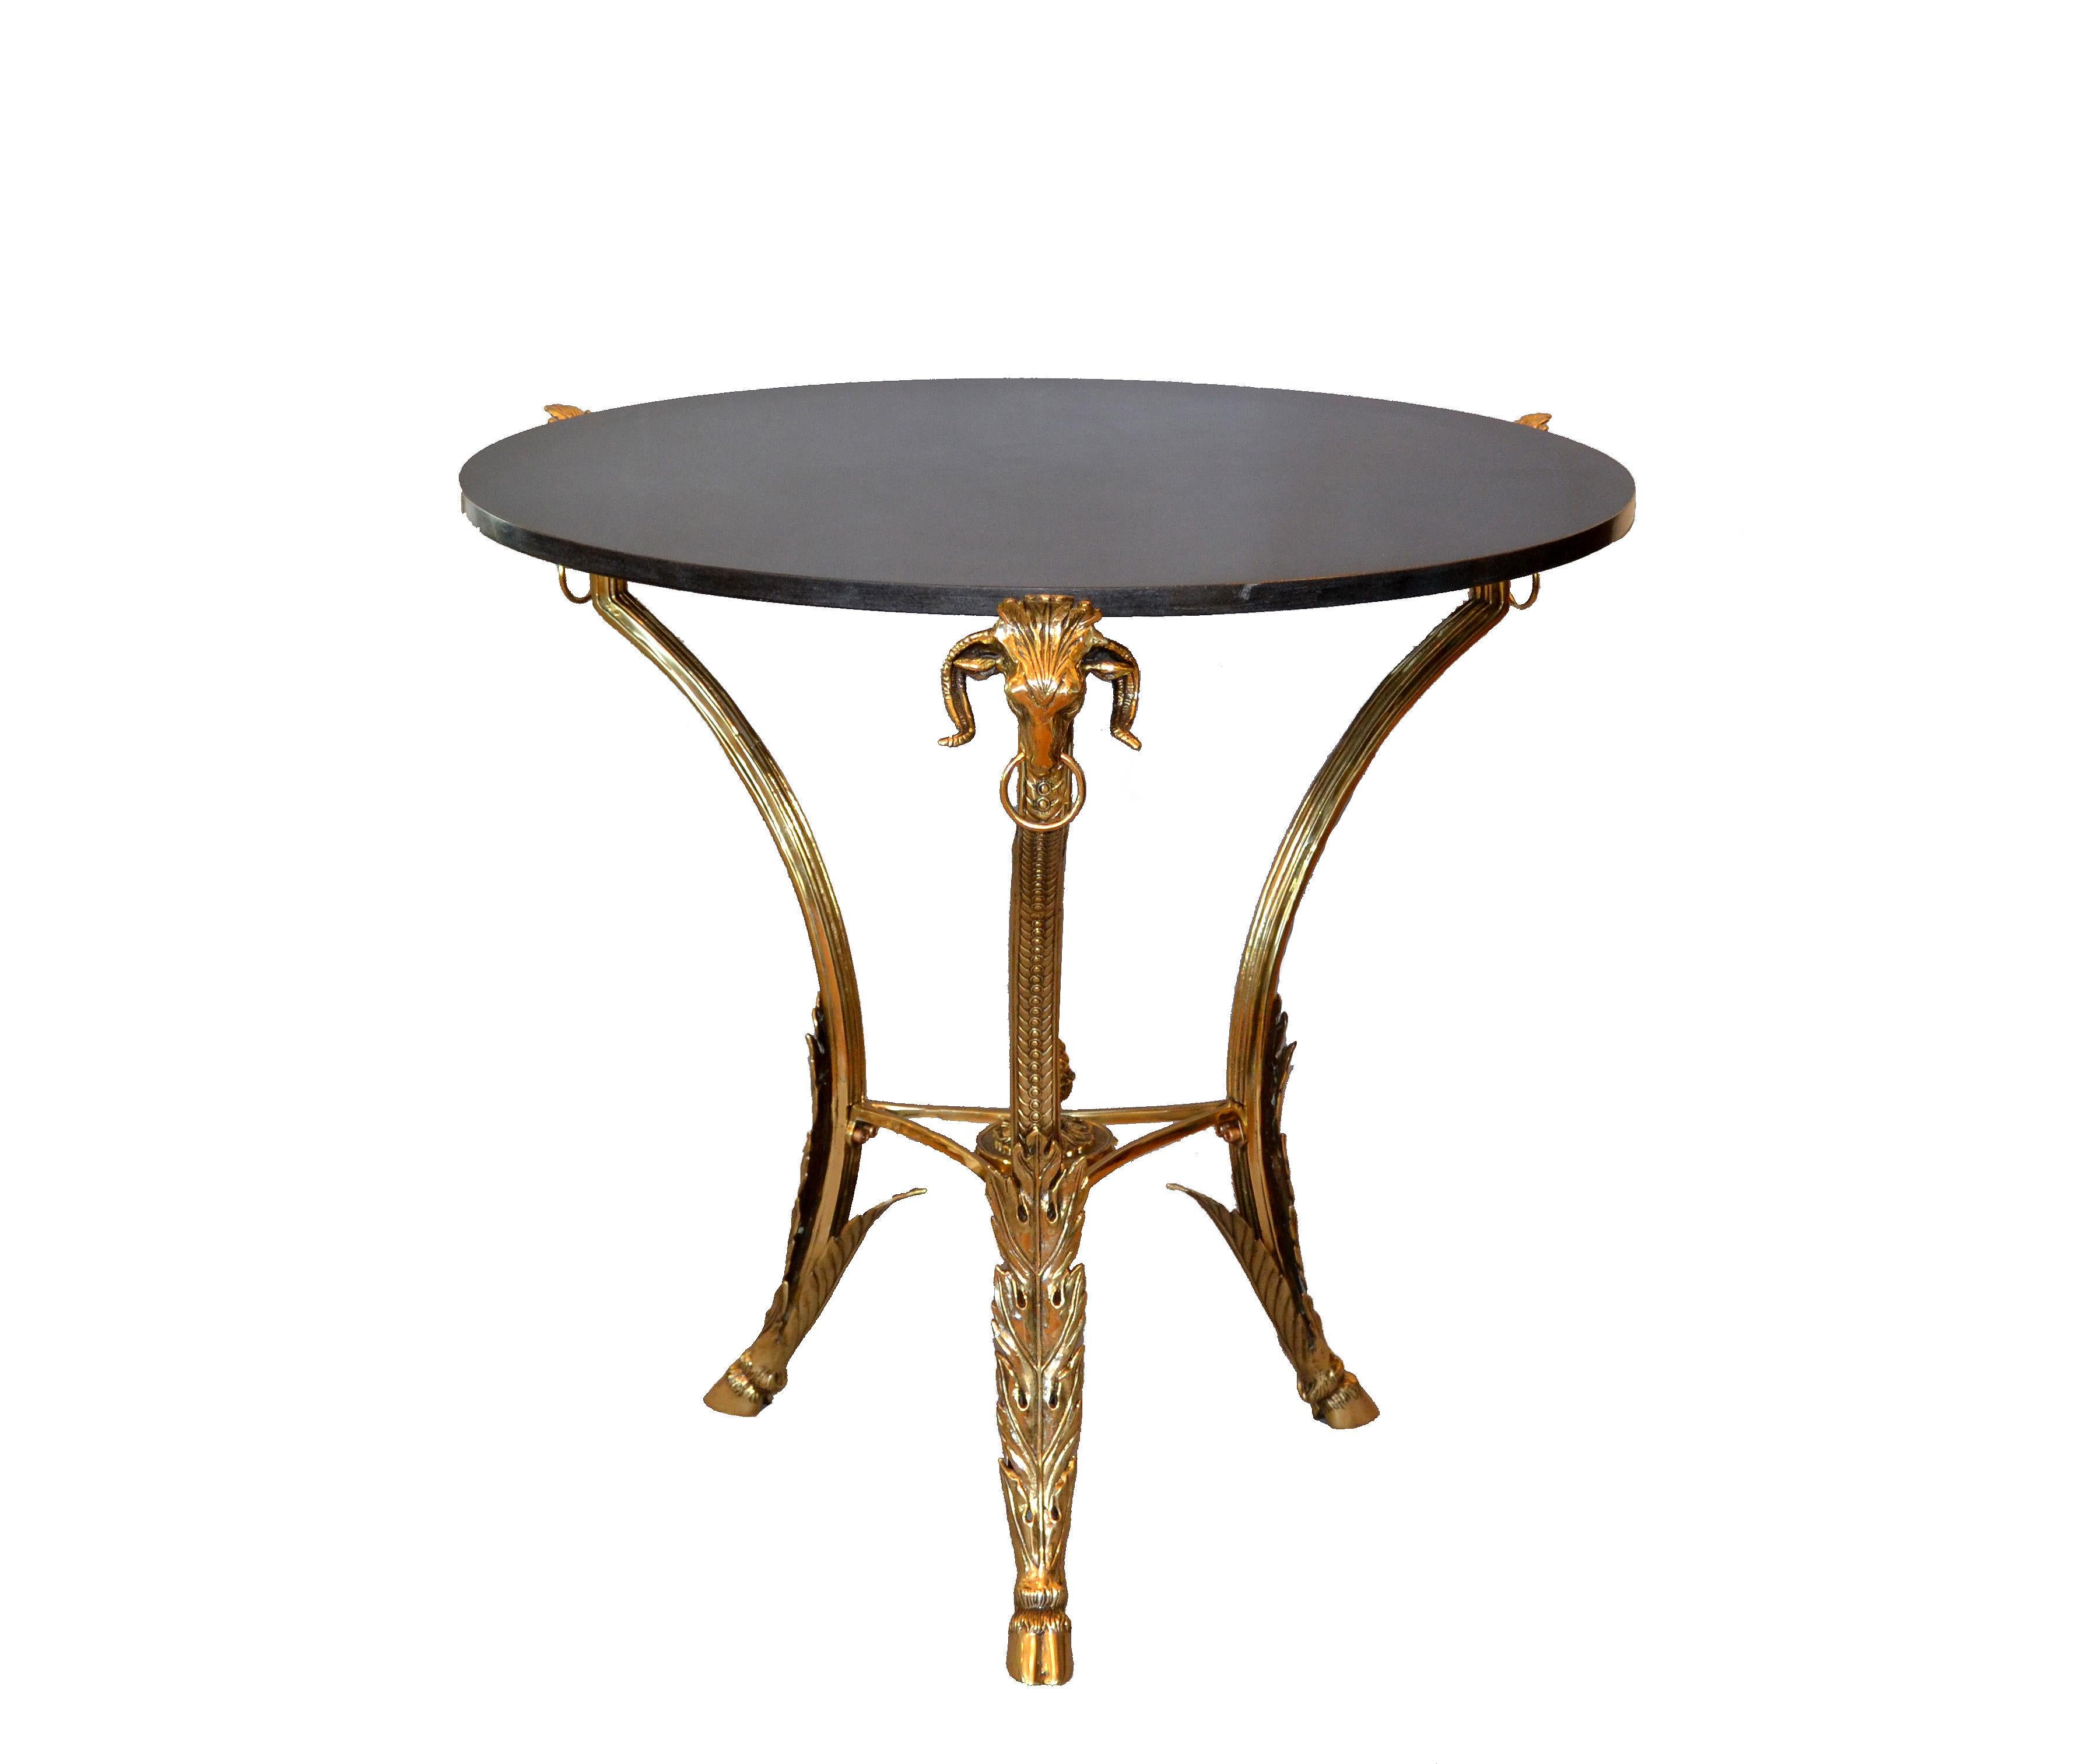 Presented is a round French Bronze Gueridon Style coffee or cocktail table with a heavy granite top in dark gray color.
This table has a variety of bronze details as the Rams heads, claw feet and acorn decoration.
Never seen before a special piece